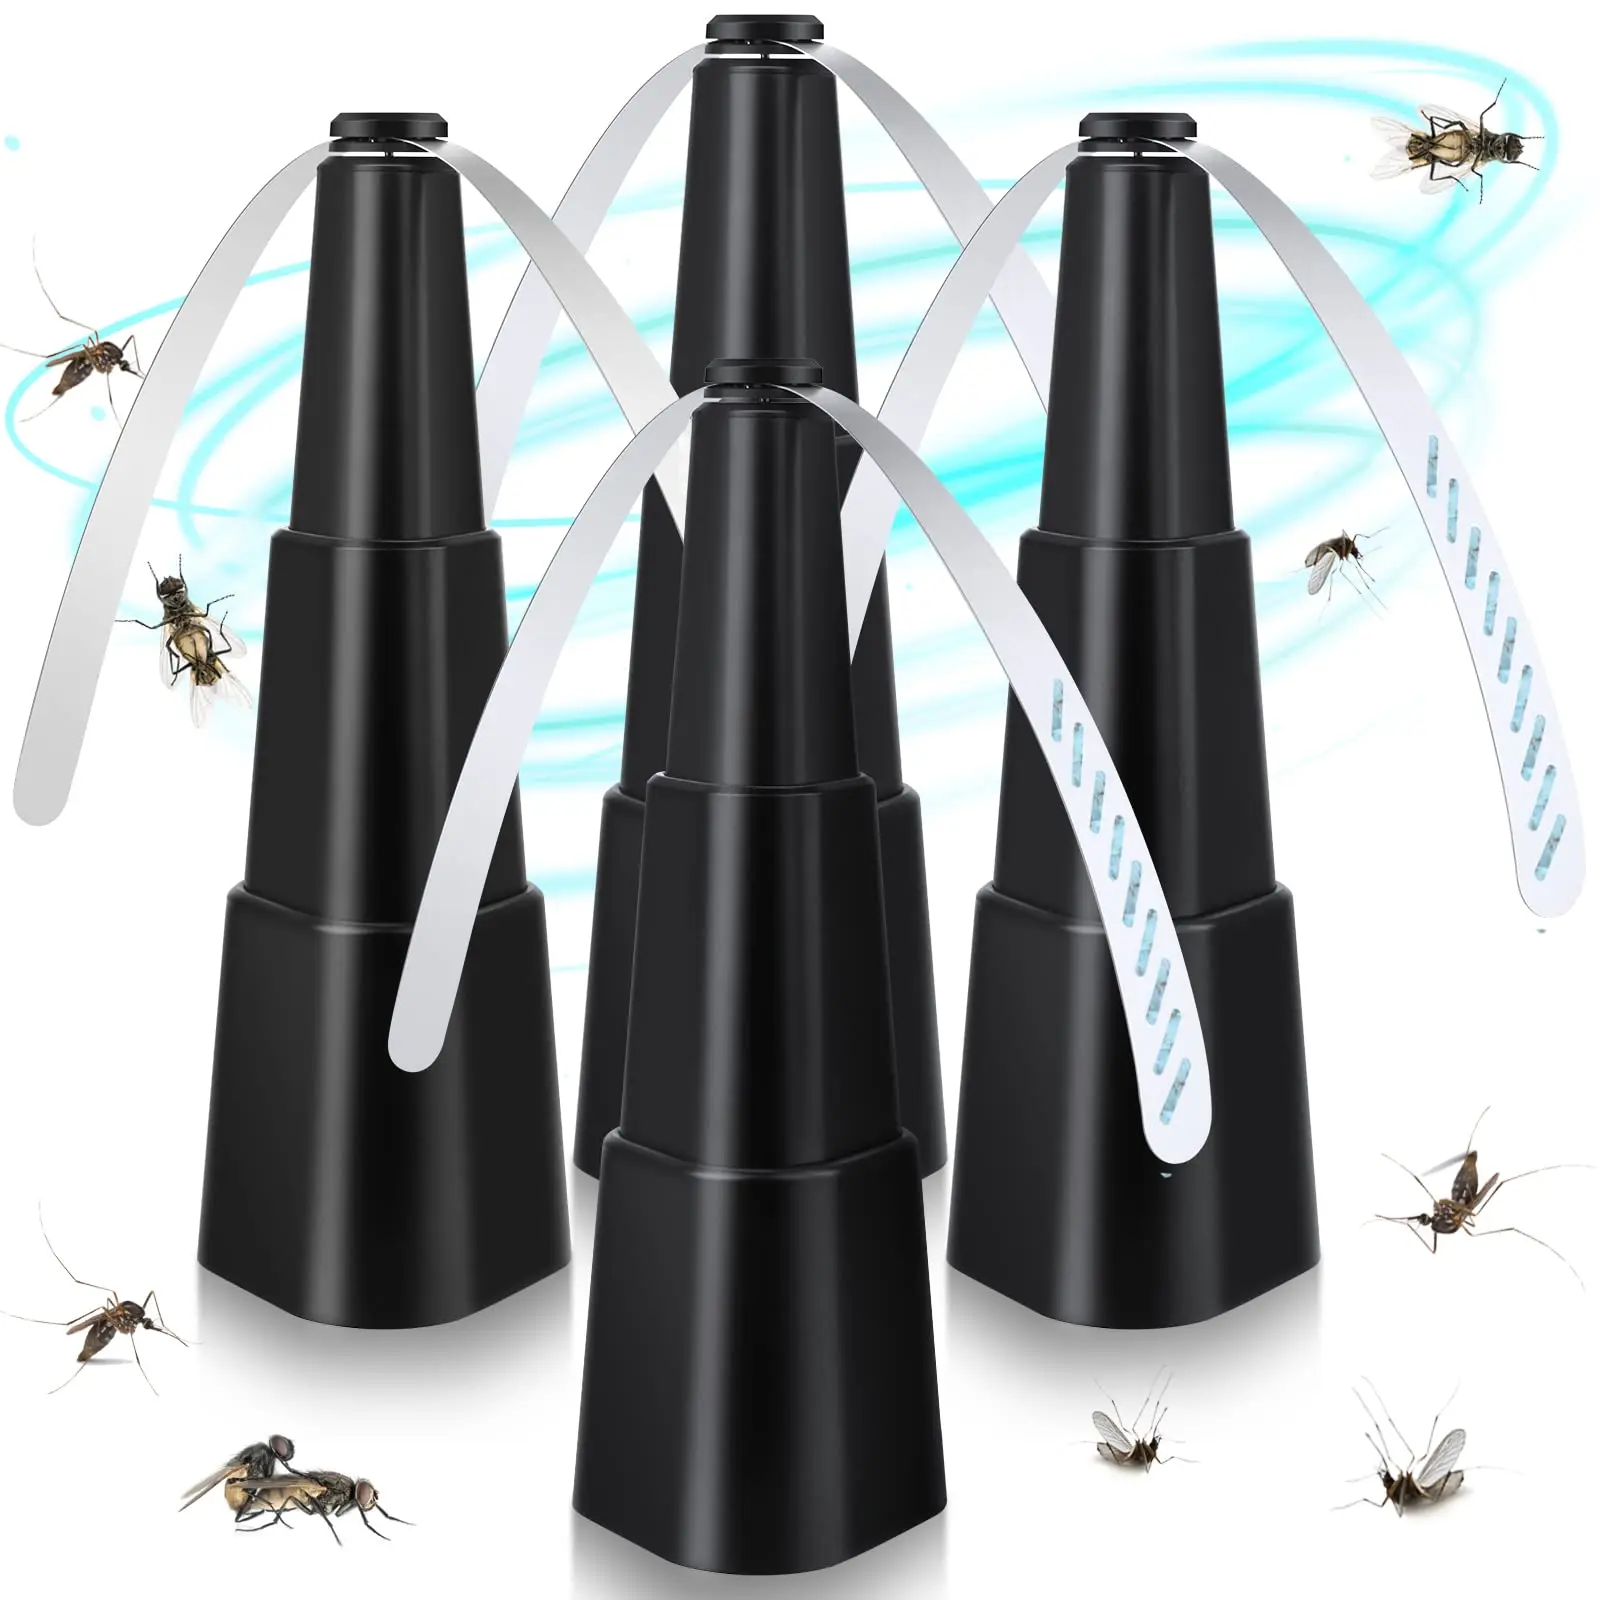 Fly Fans for Tables Fly Repellent Fan Indoor Outdoor with Holographic Blades Keep Flies Away Bug Repellent Outdoor insecten verjager fly repellent fan keep flies and enjoy food away killer meal insect mosquitoes outdoor bugs mosquito from i6s4